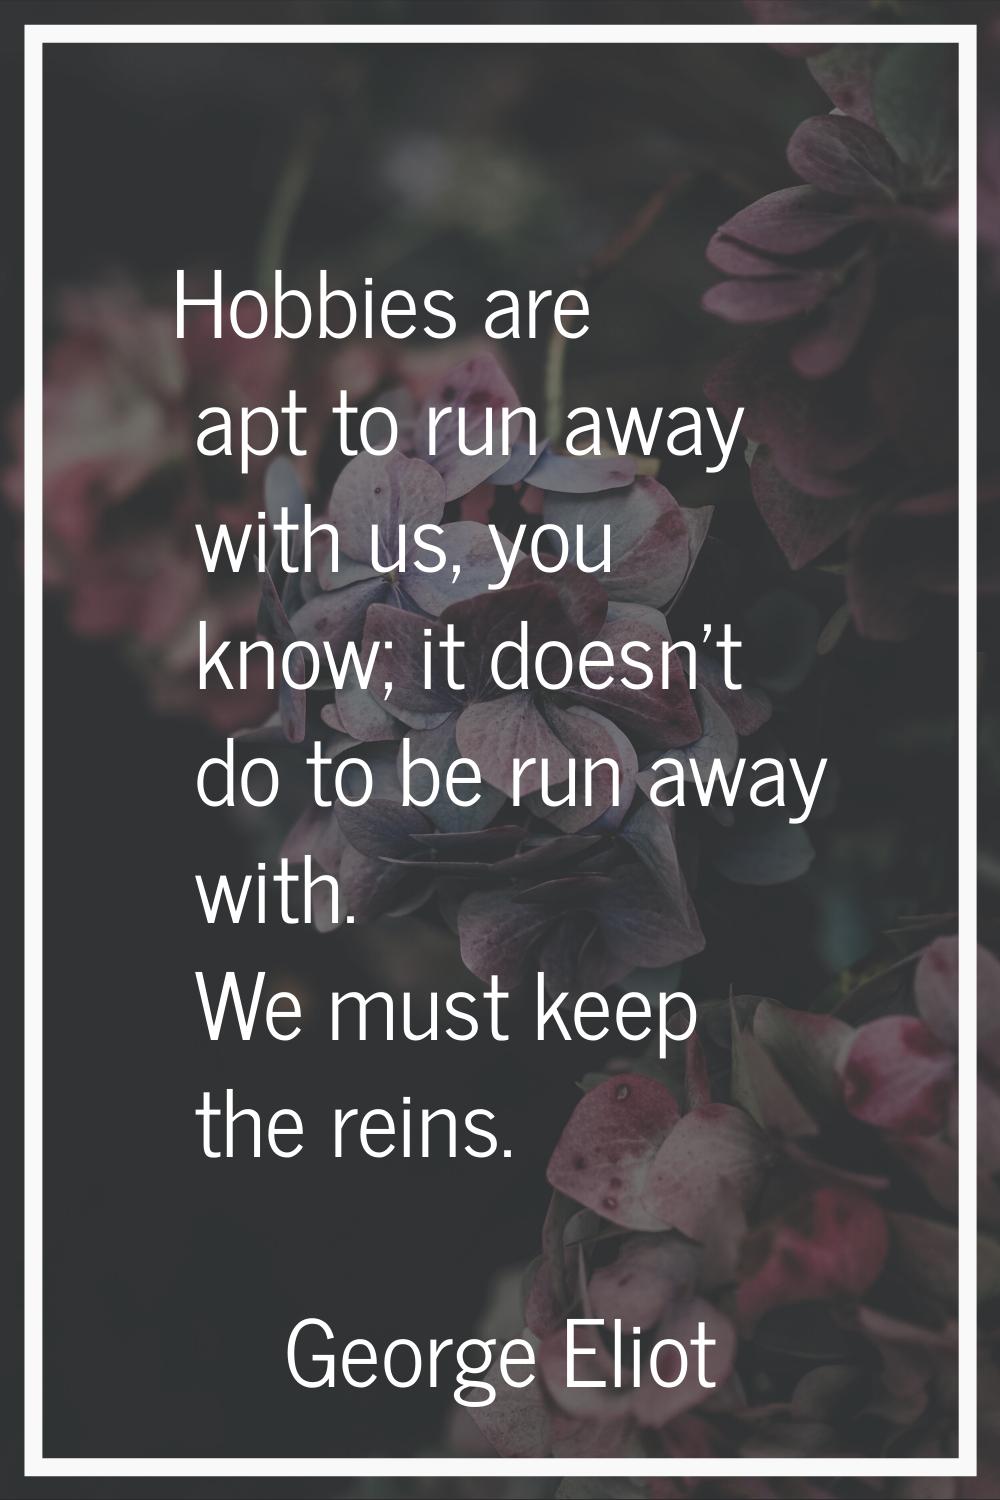 Hobbies are apt to run away with us, you know; it doesn't do to be run away with. We must keep the 